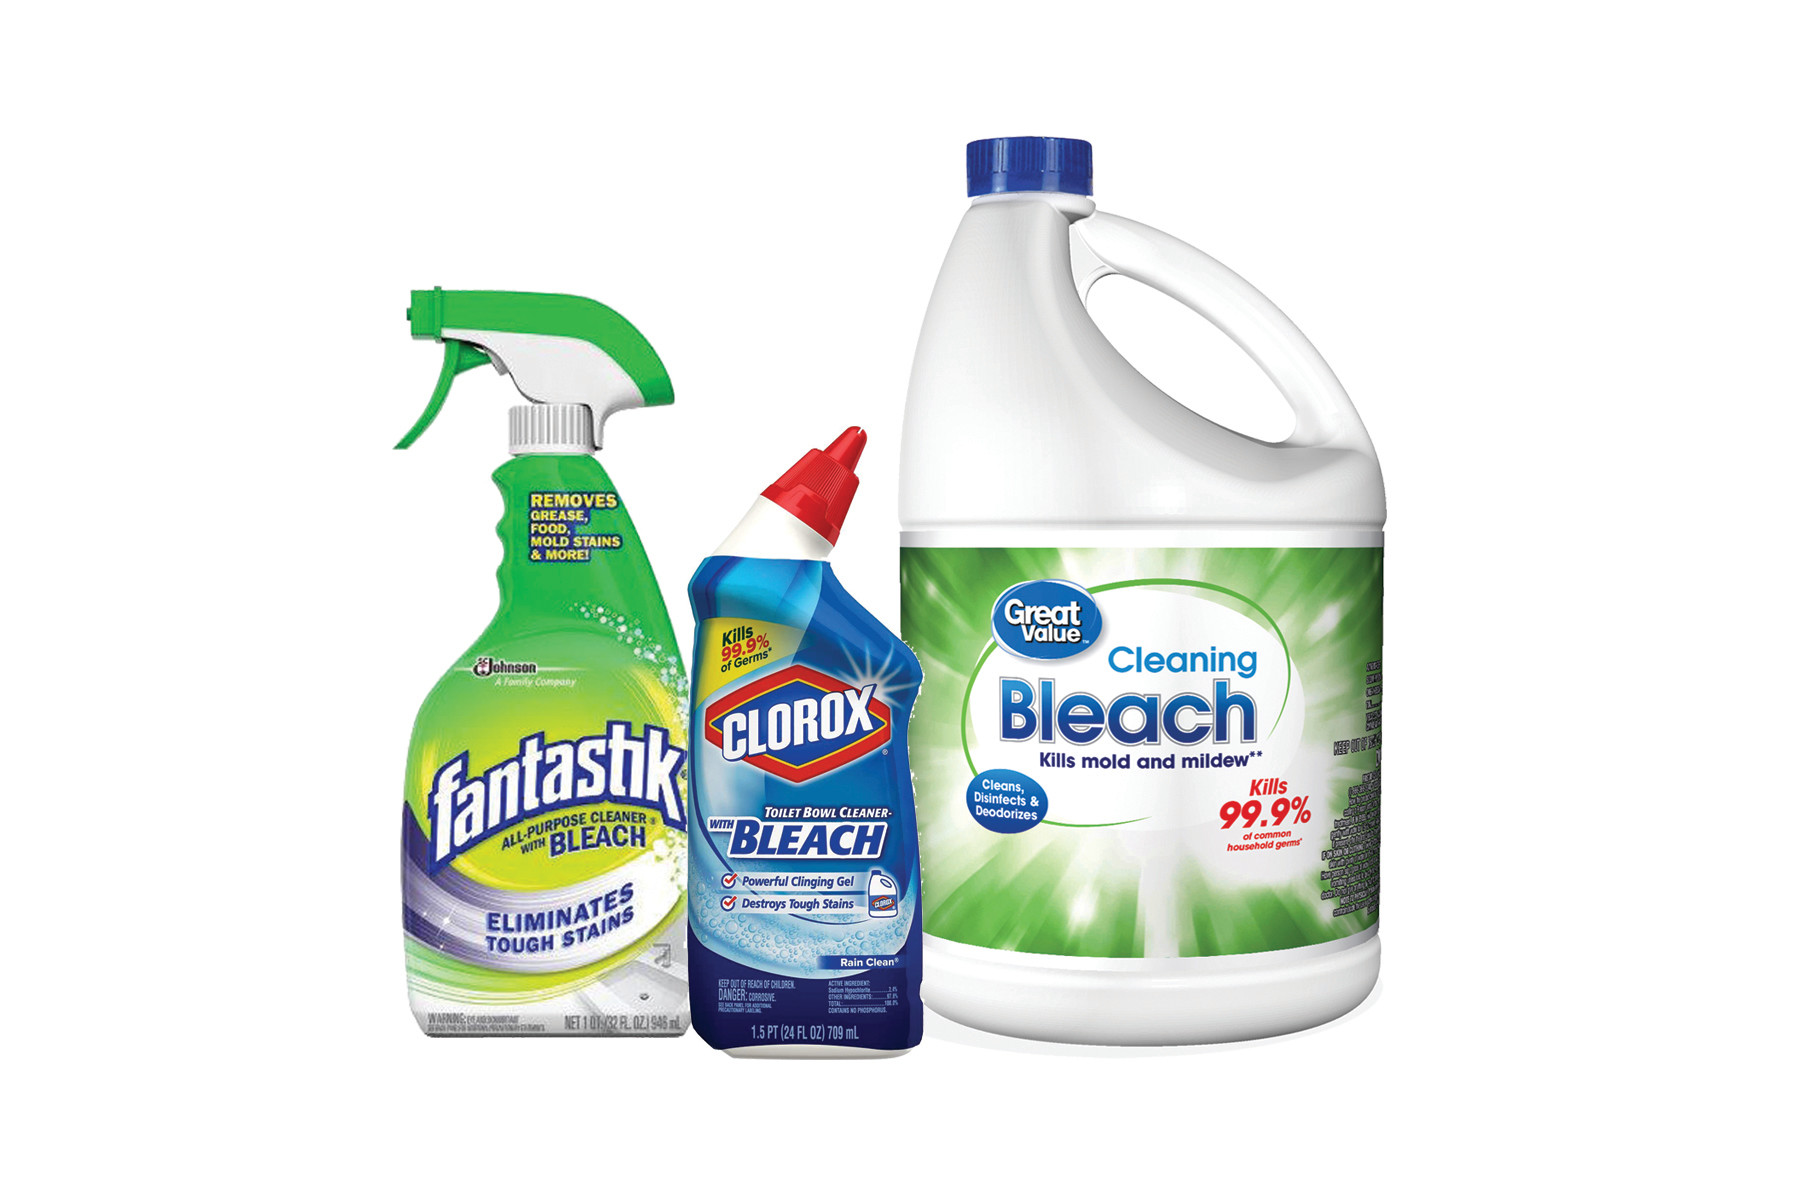 Bleach Products